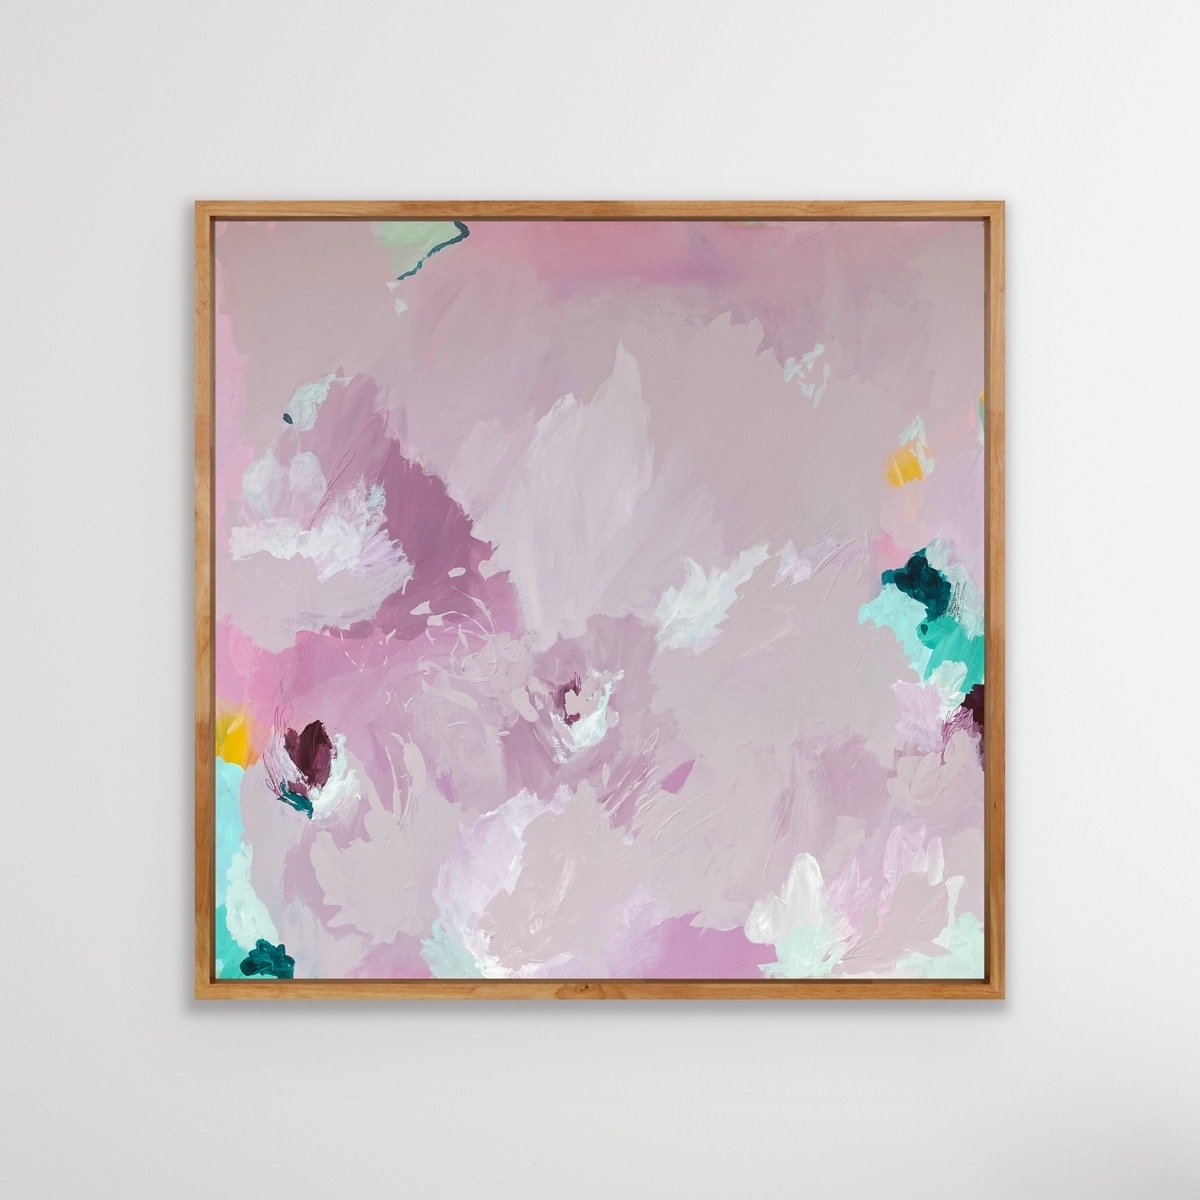 A Whisper in Pink, original painting, framed in raw timber, 65cm x 65cm, Vanessa Maver